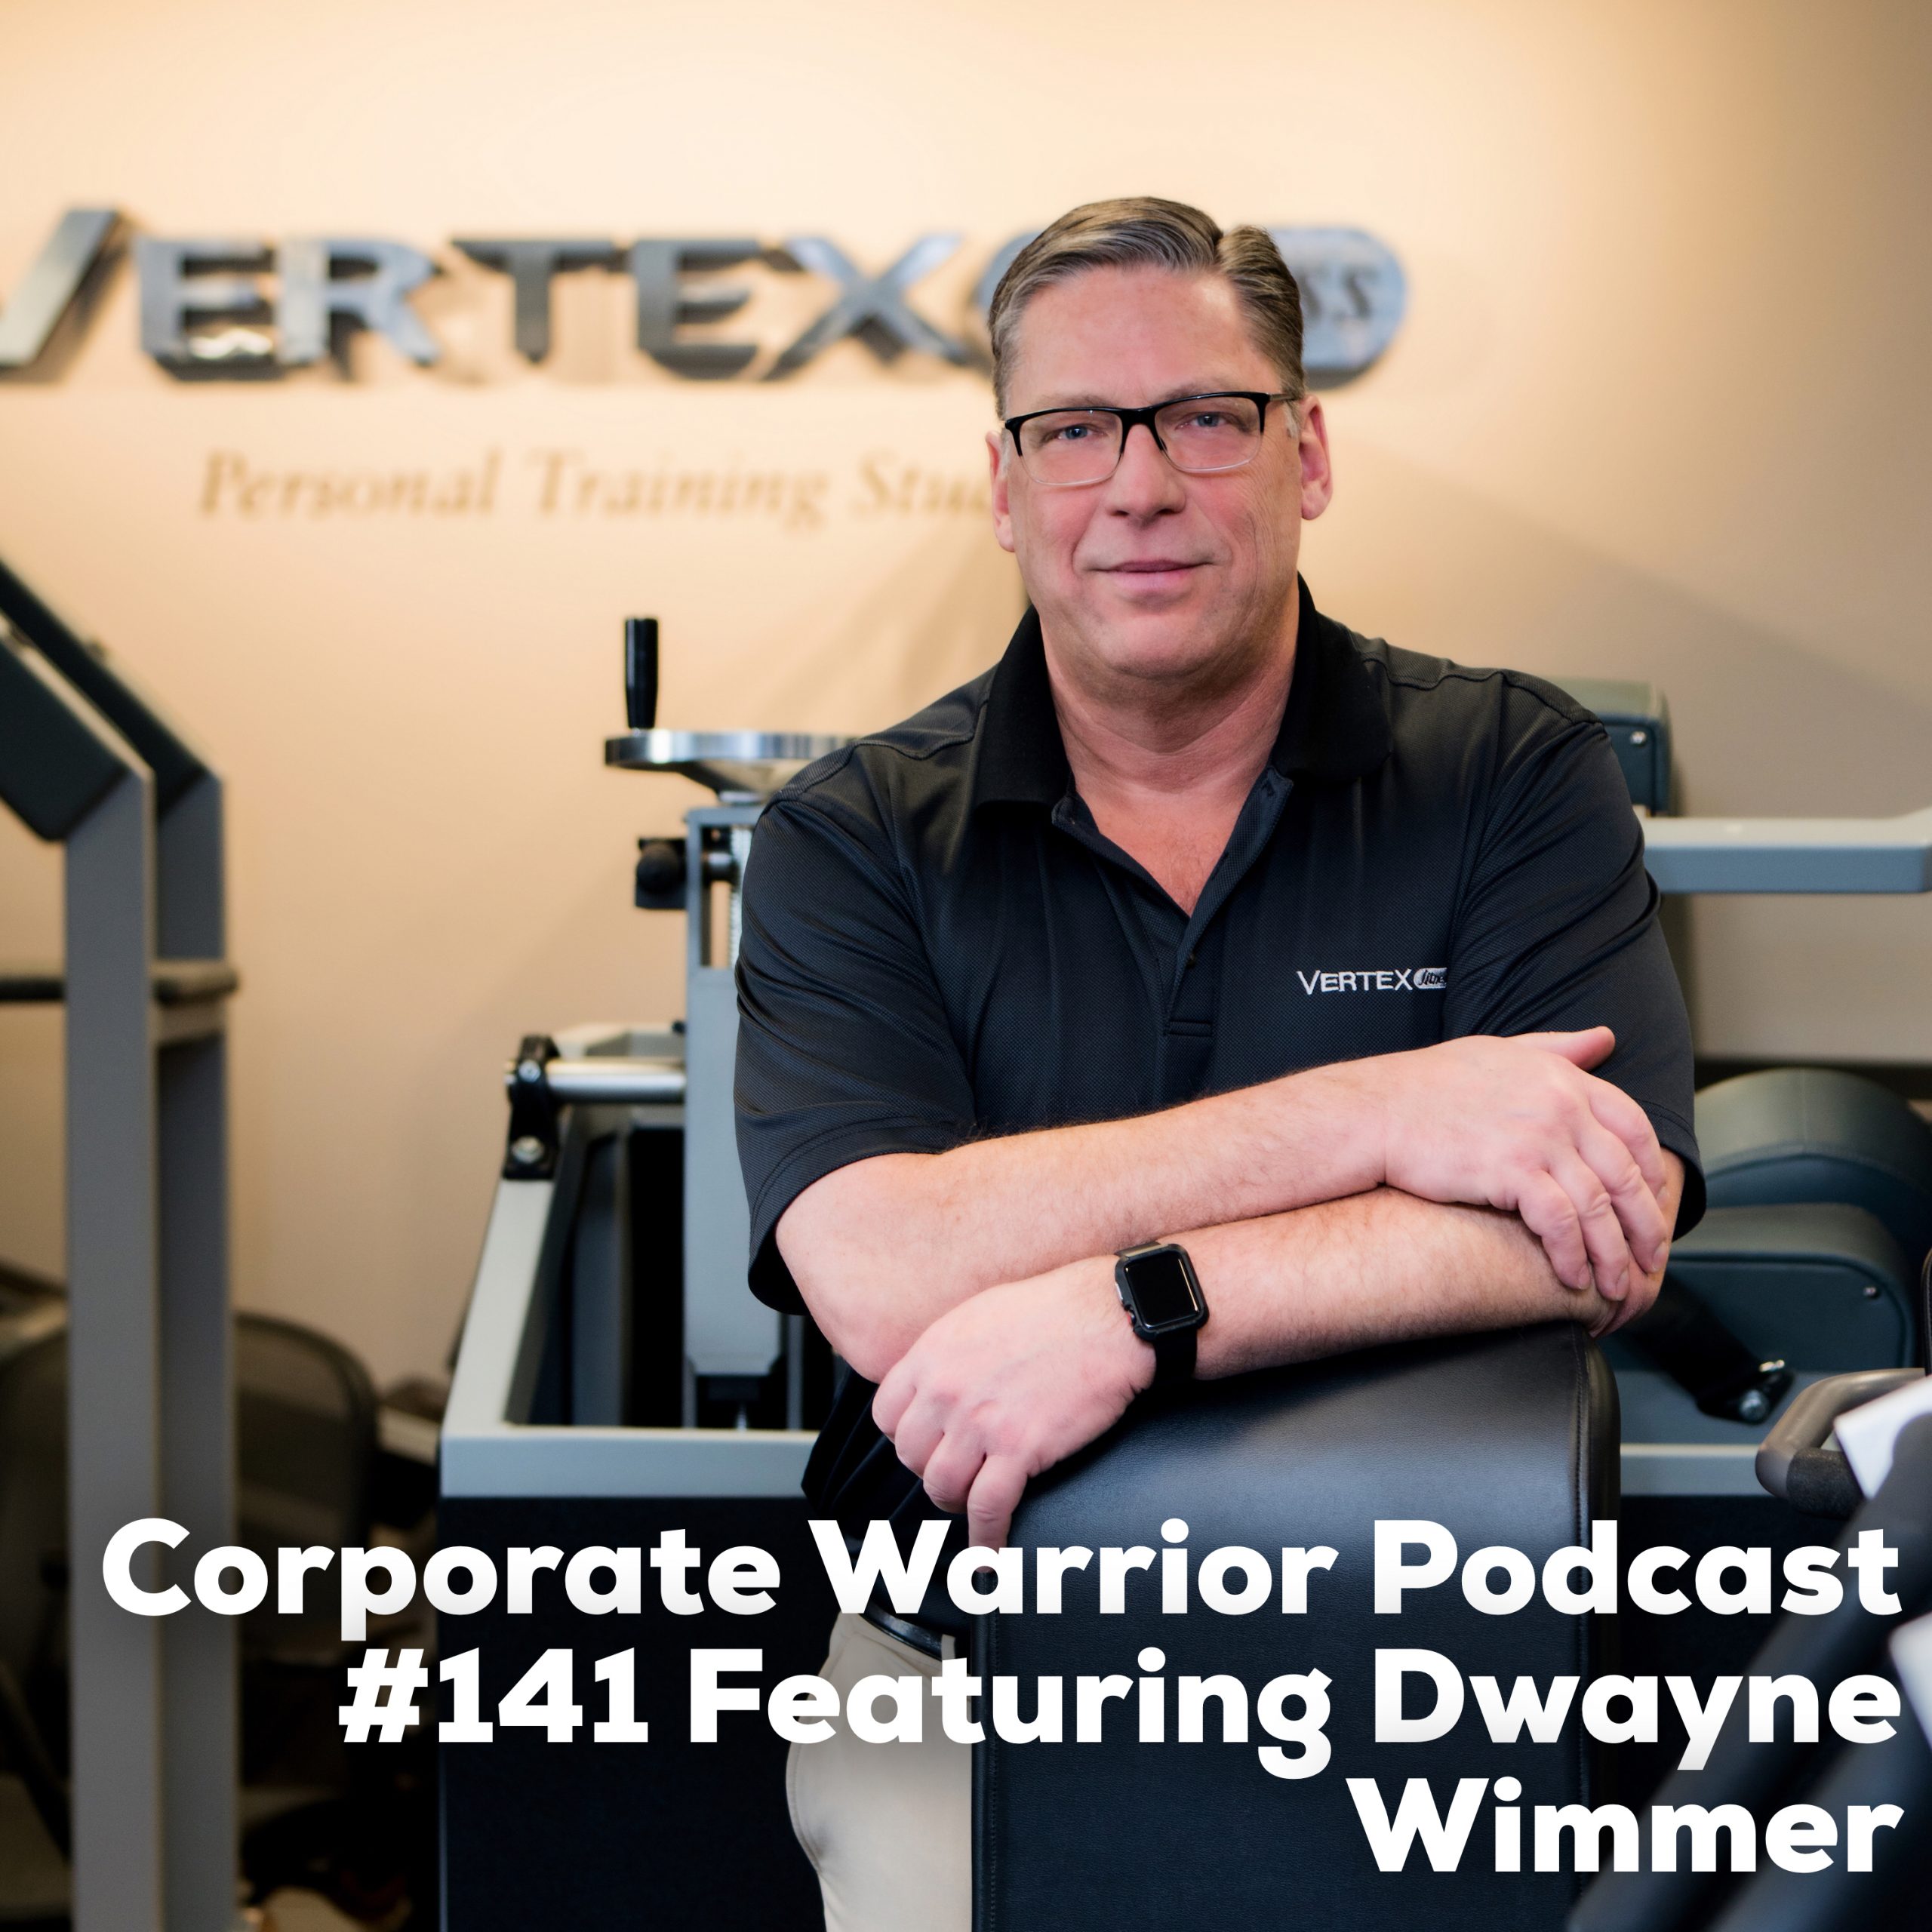 Dwayne Wimmer the Corporate Warrior Podcast Client Acquisition